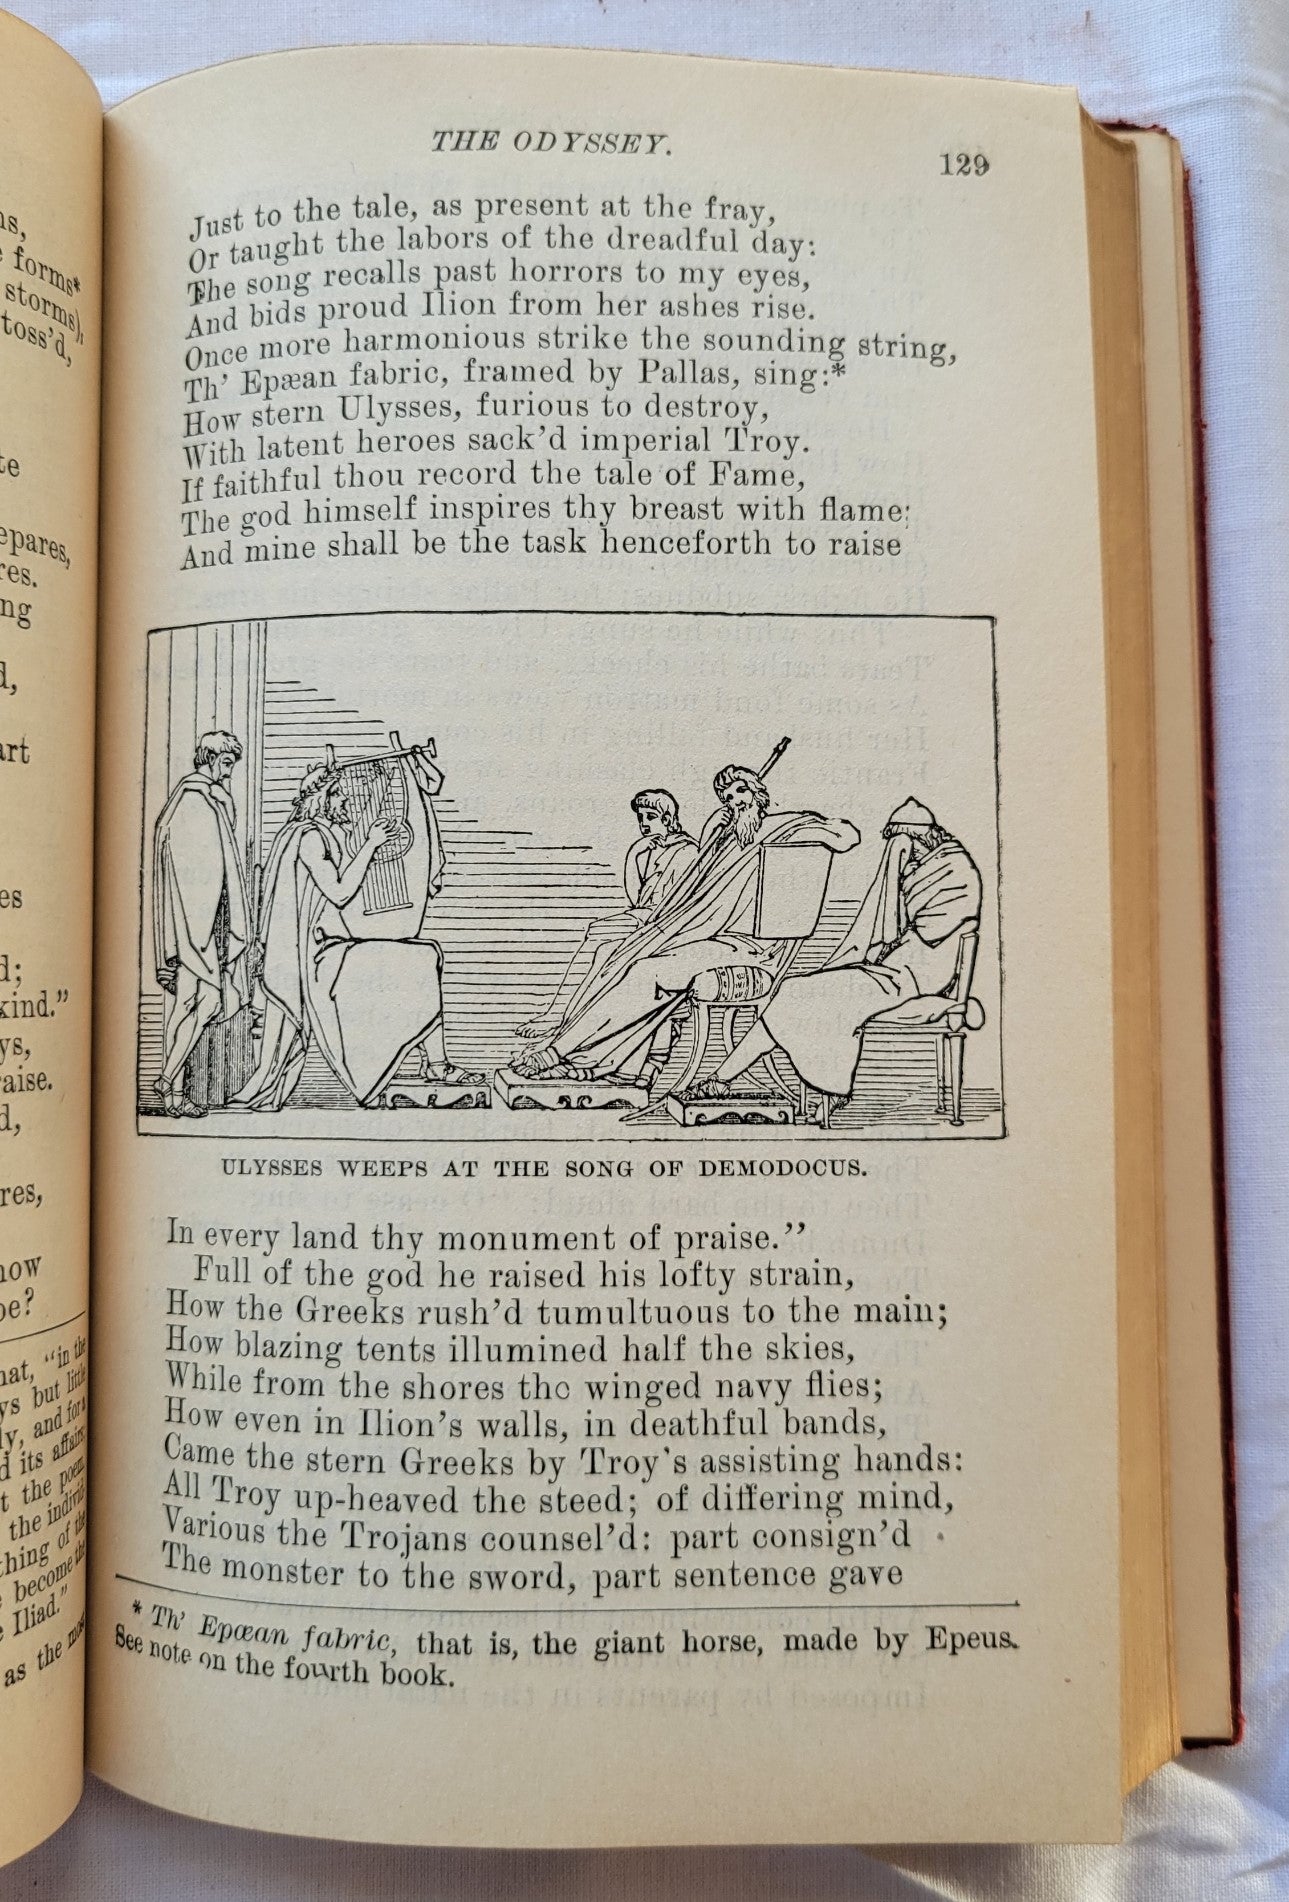 Antique book for sale, Homer's ancient Greek epic, The Odyssey translated by Alexander Pope, published by A. L. Burt Company (before 1932), with notes from Rev. Theodore Alois Buckley M.A. View of page 192